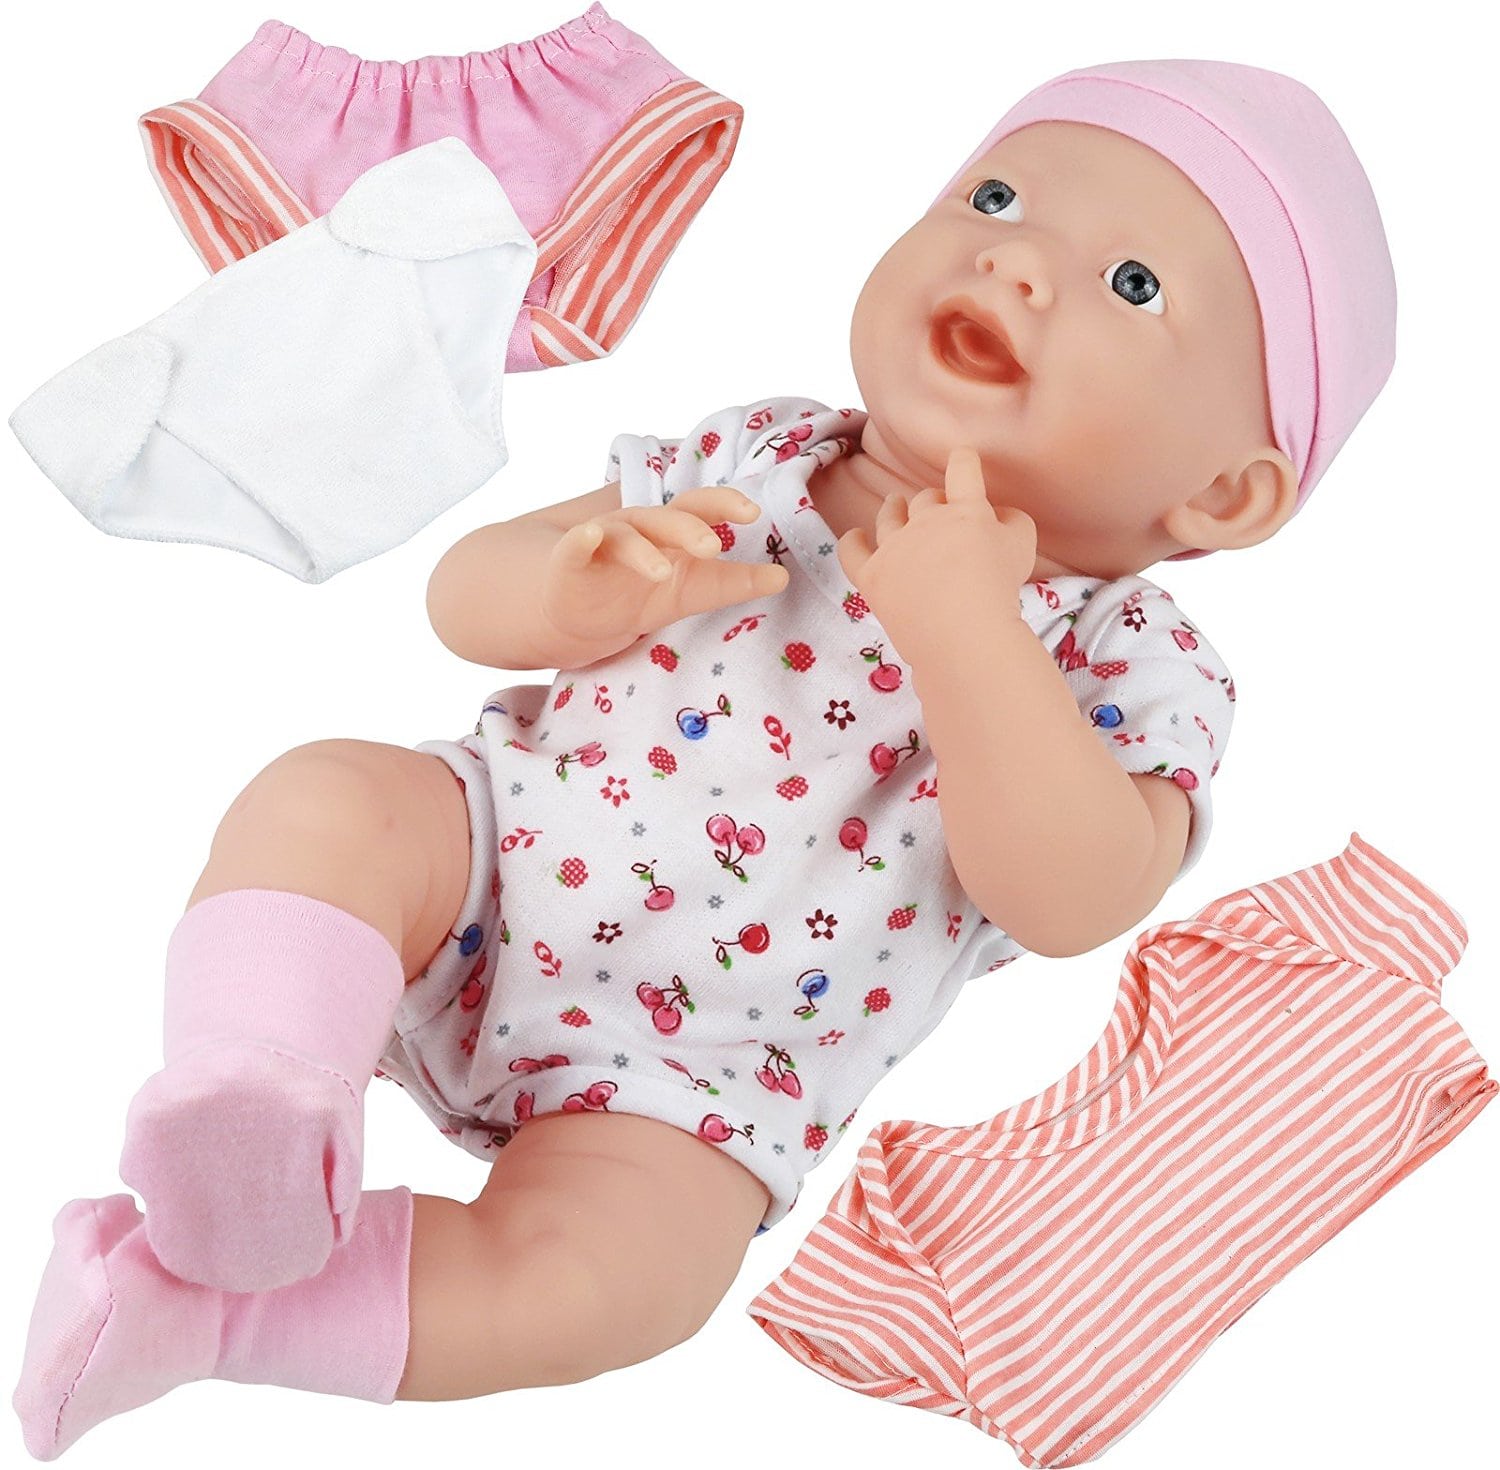 cry baby doll clothes